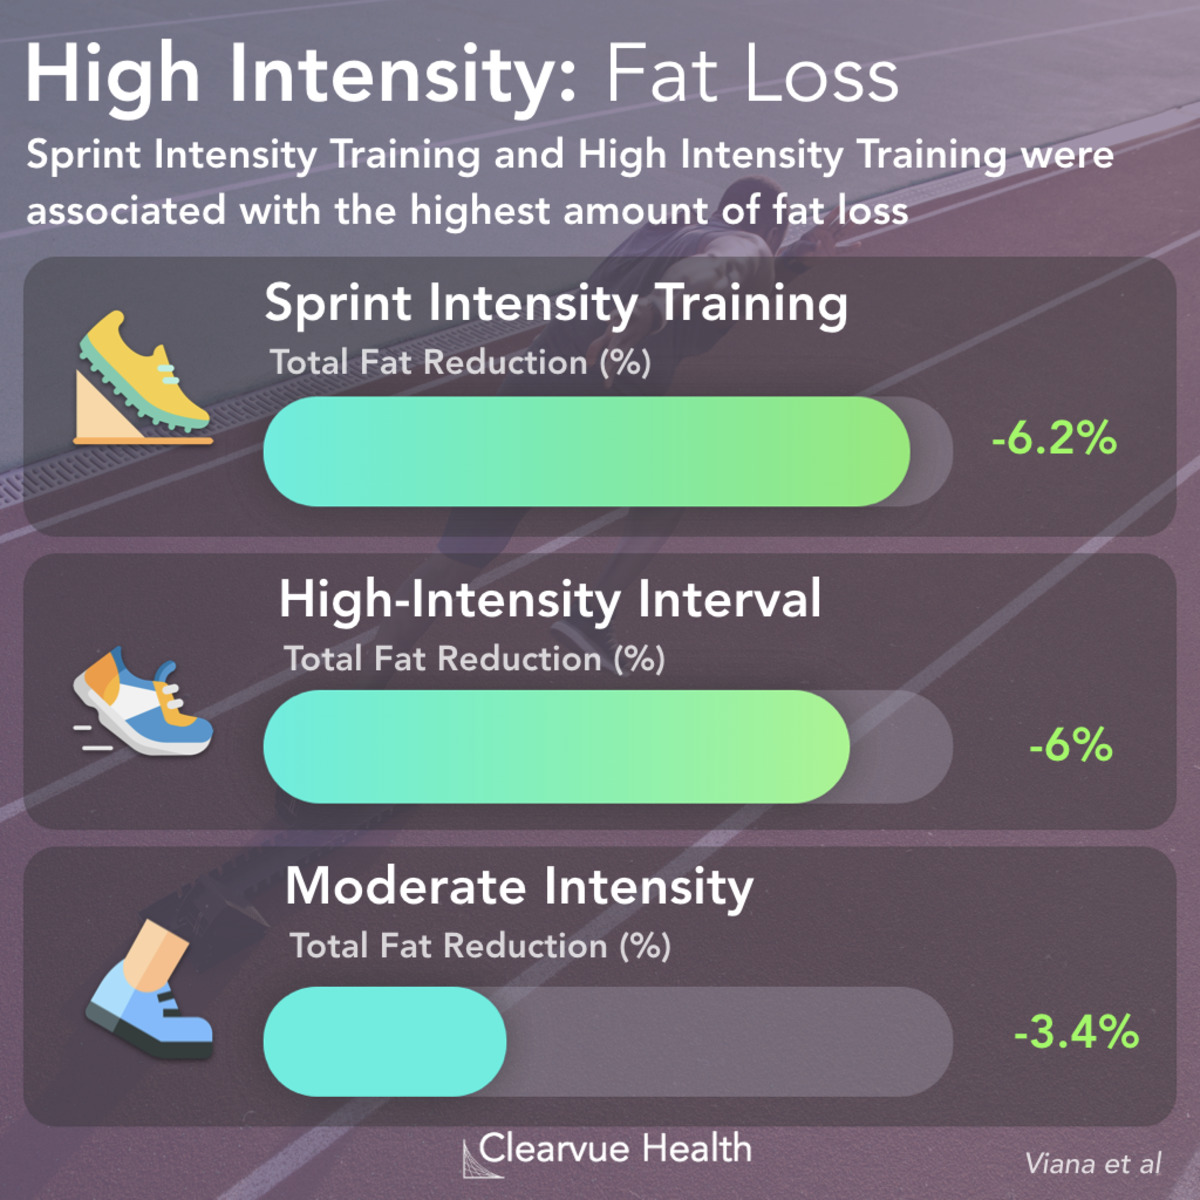 Hiit Vs Sit Vs Moderate Exercise For Weight Loss